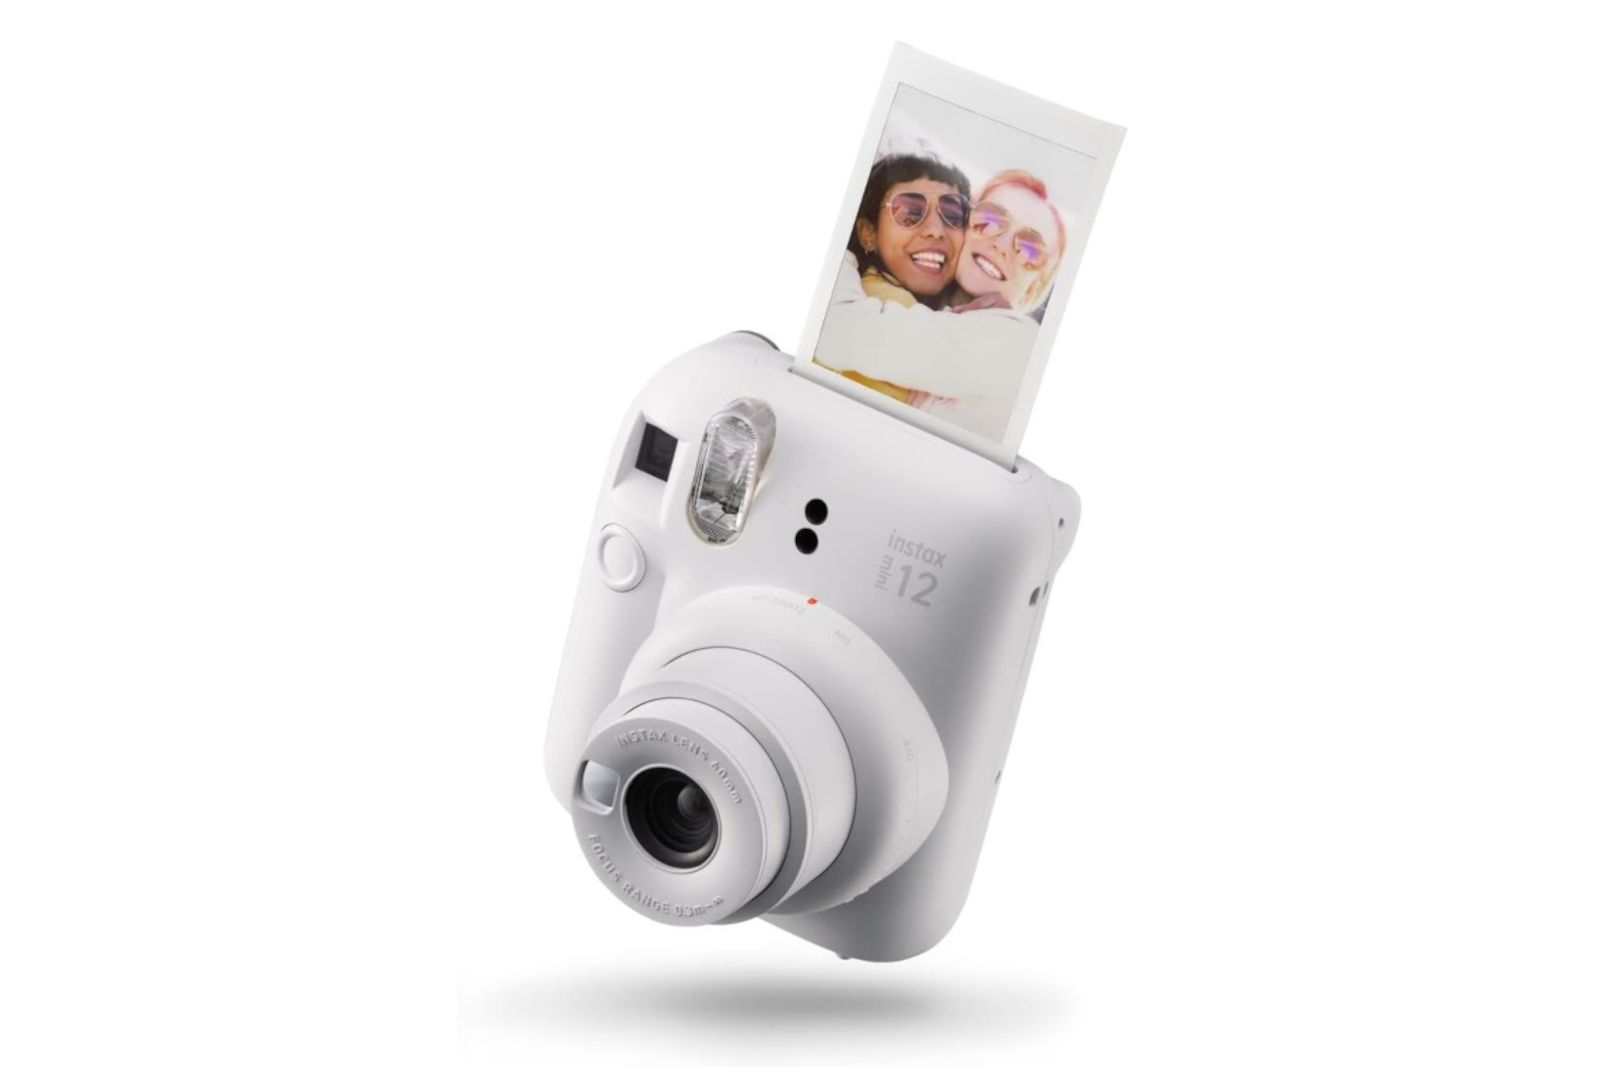 Fujifilm Instax Mini EVO Instant Camera, Compact and Portable Design,  Polaroid Cameras for Photography, Built-in Selfie Mirror, Easy to Use  Camera for